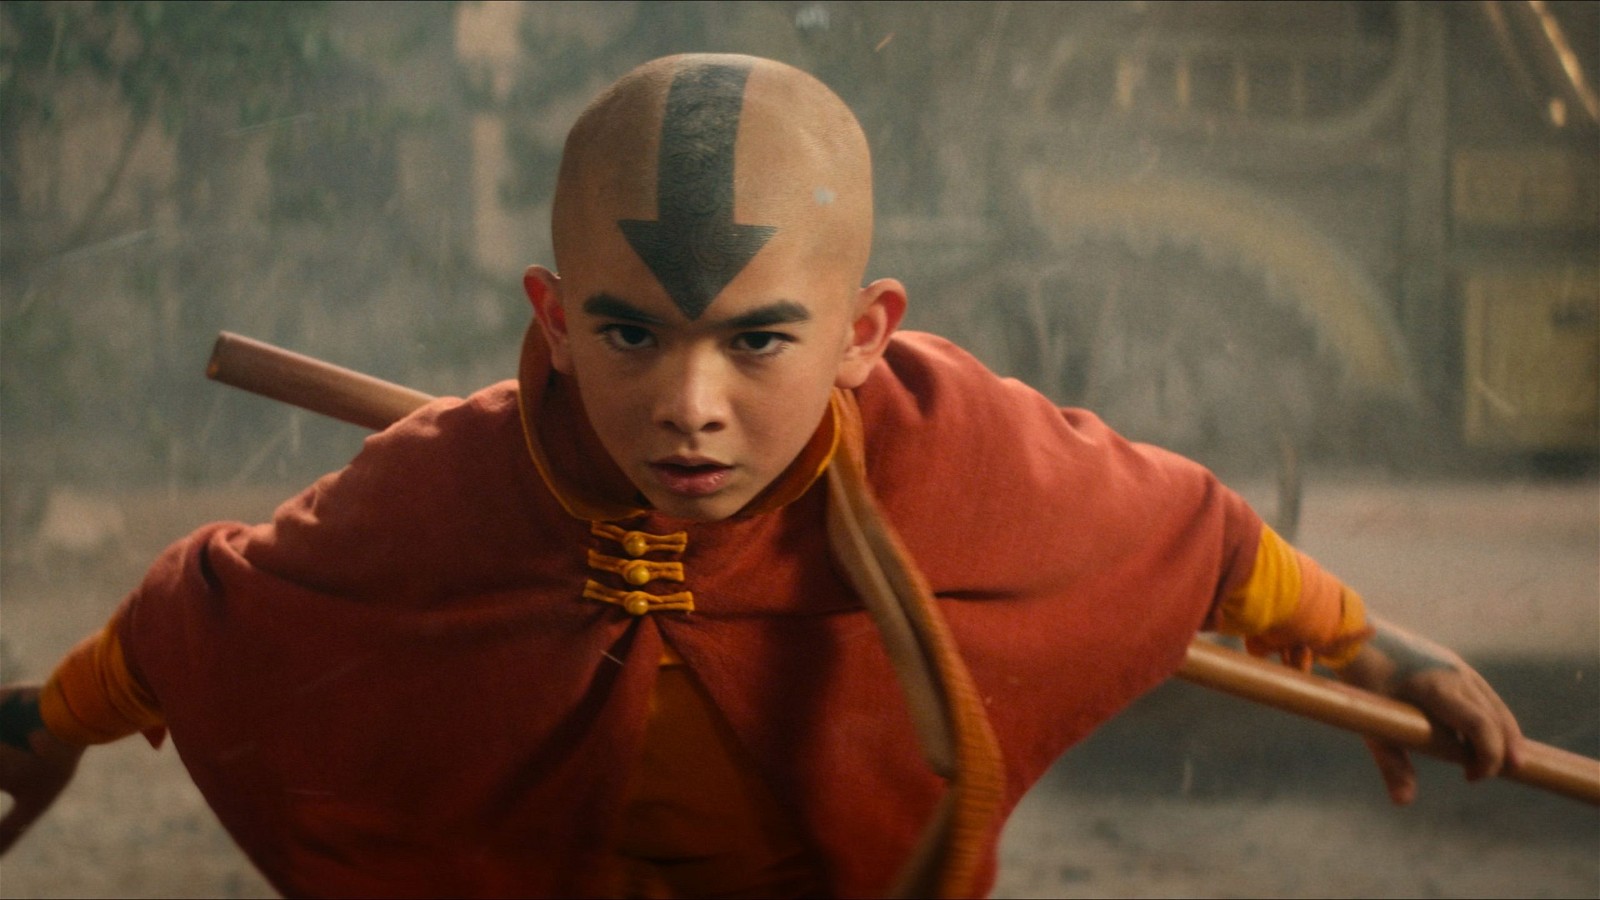 Fans were not happy with various narrative choices of Netflix's A still from Netflix's Avatar: The Last Airbender